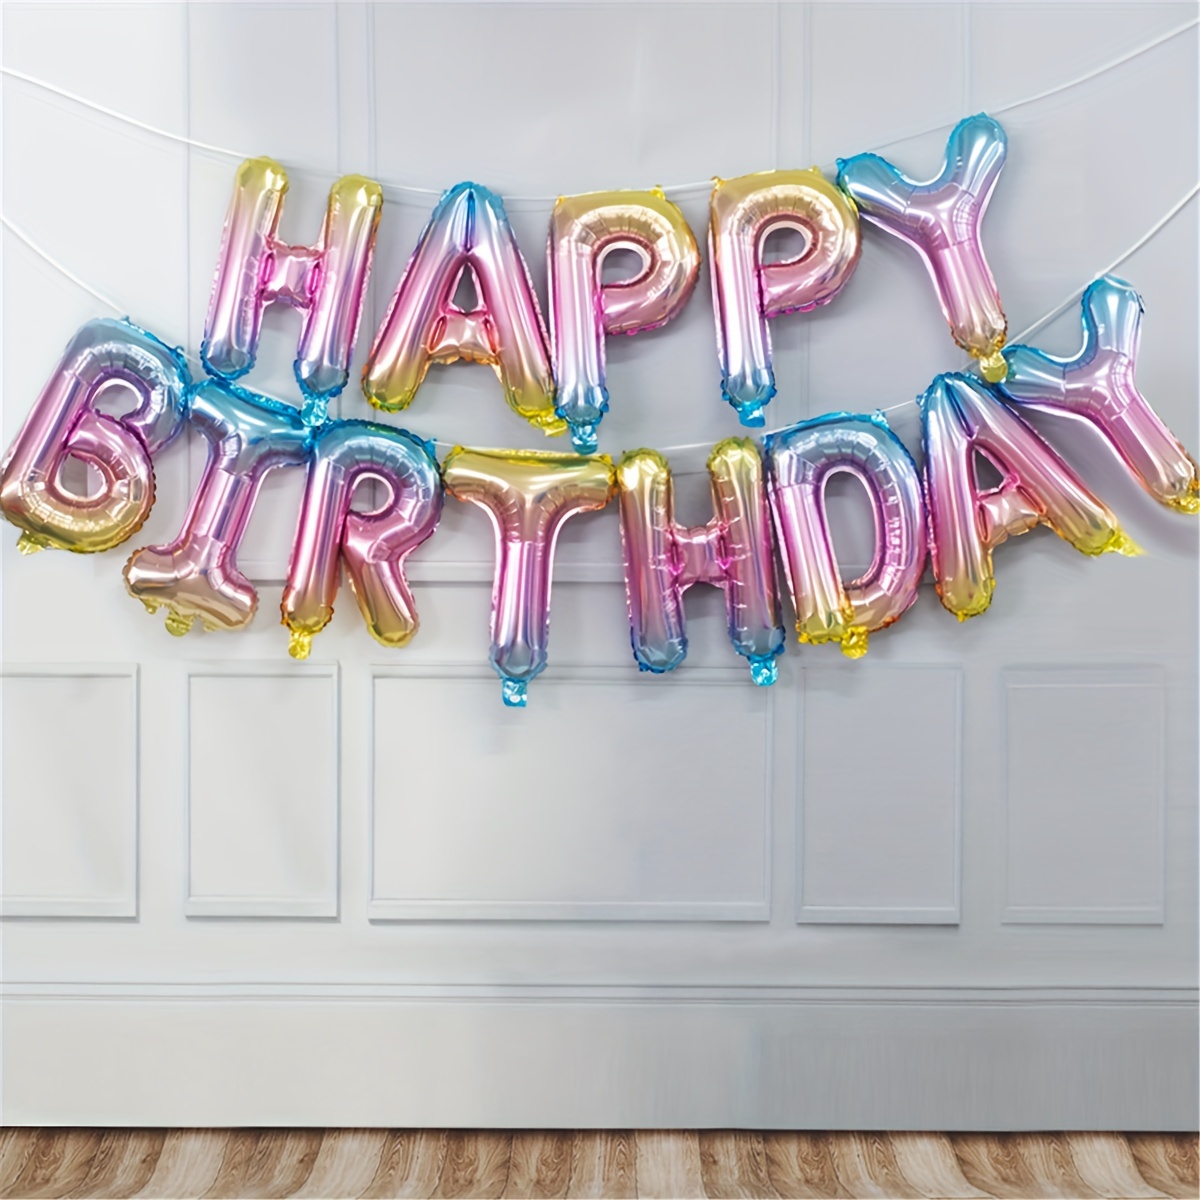 

16-inch Happy Birthday Balloons Banner Set, Rose Gold Aluminum Film Letter Balloons, Reusable Occasion Decoration For Birthday Parties, Suitable For Ages 14+ (13-piece Set)